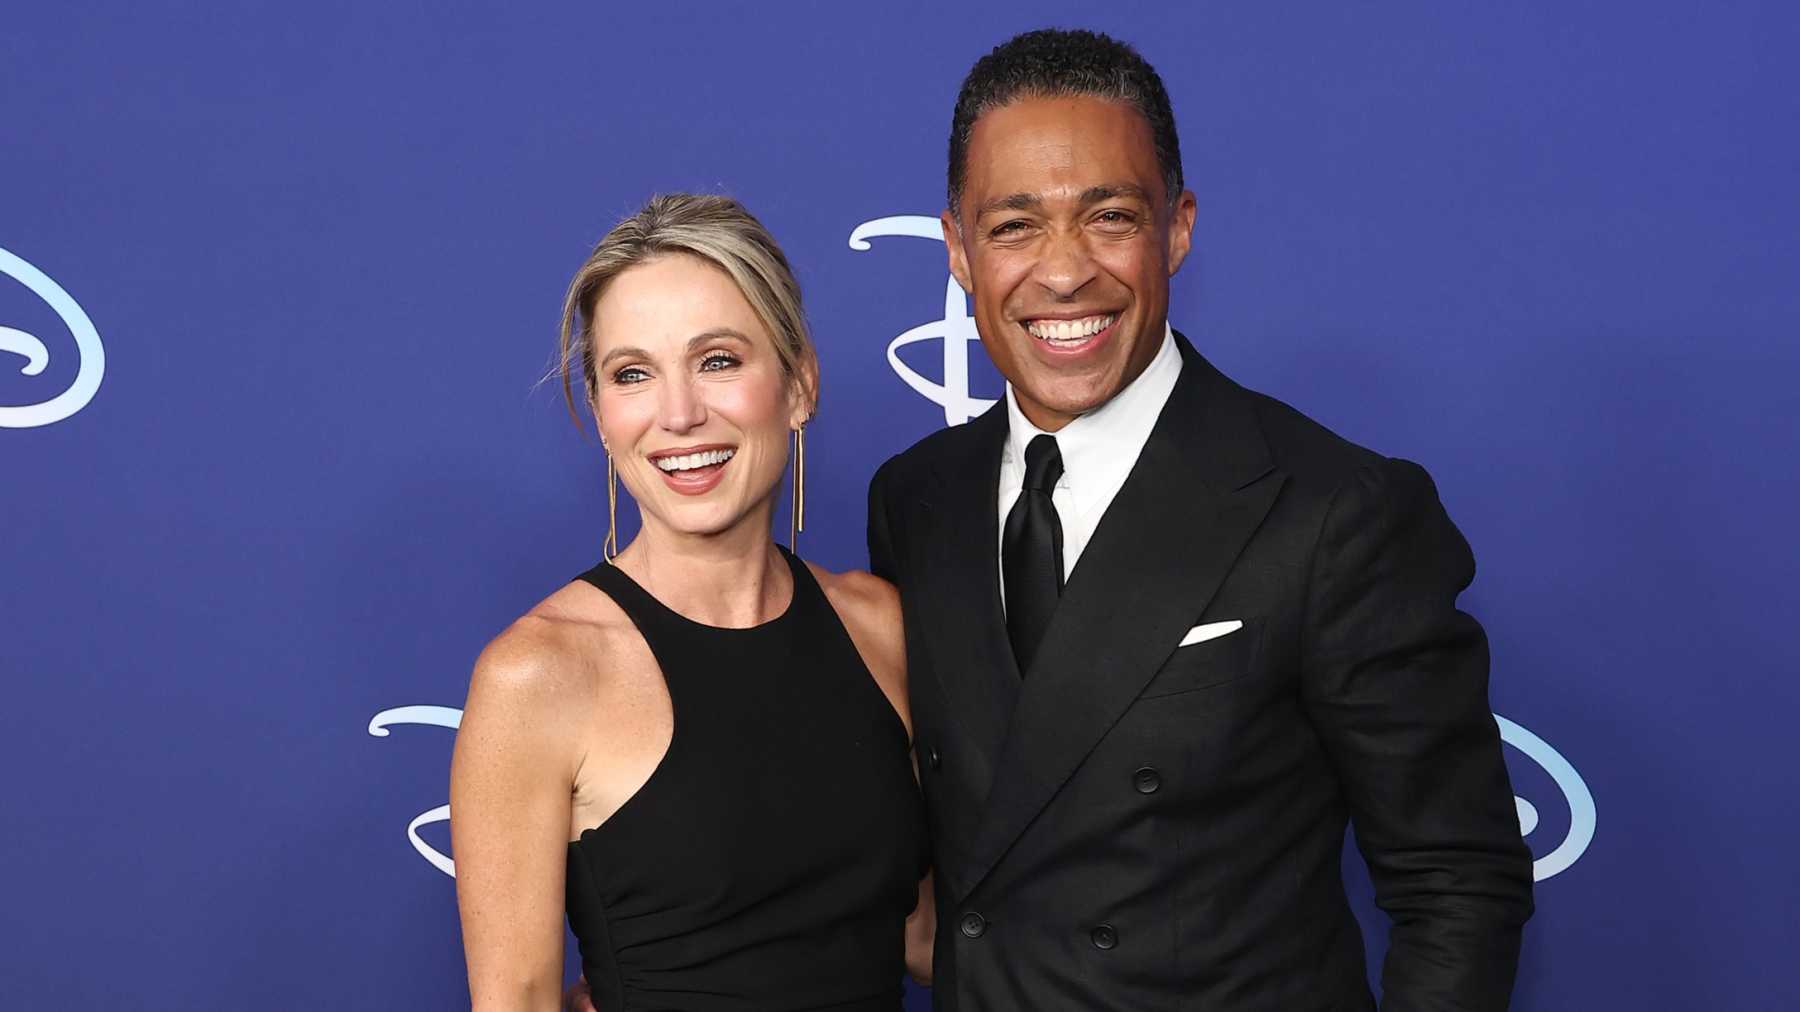 Gma Hosts Amy Robach And Tj Holmes Reportedly Had An Affair Before Leaving Their Spouses